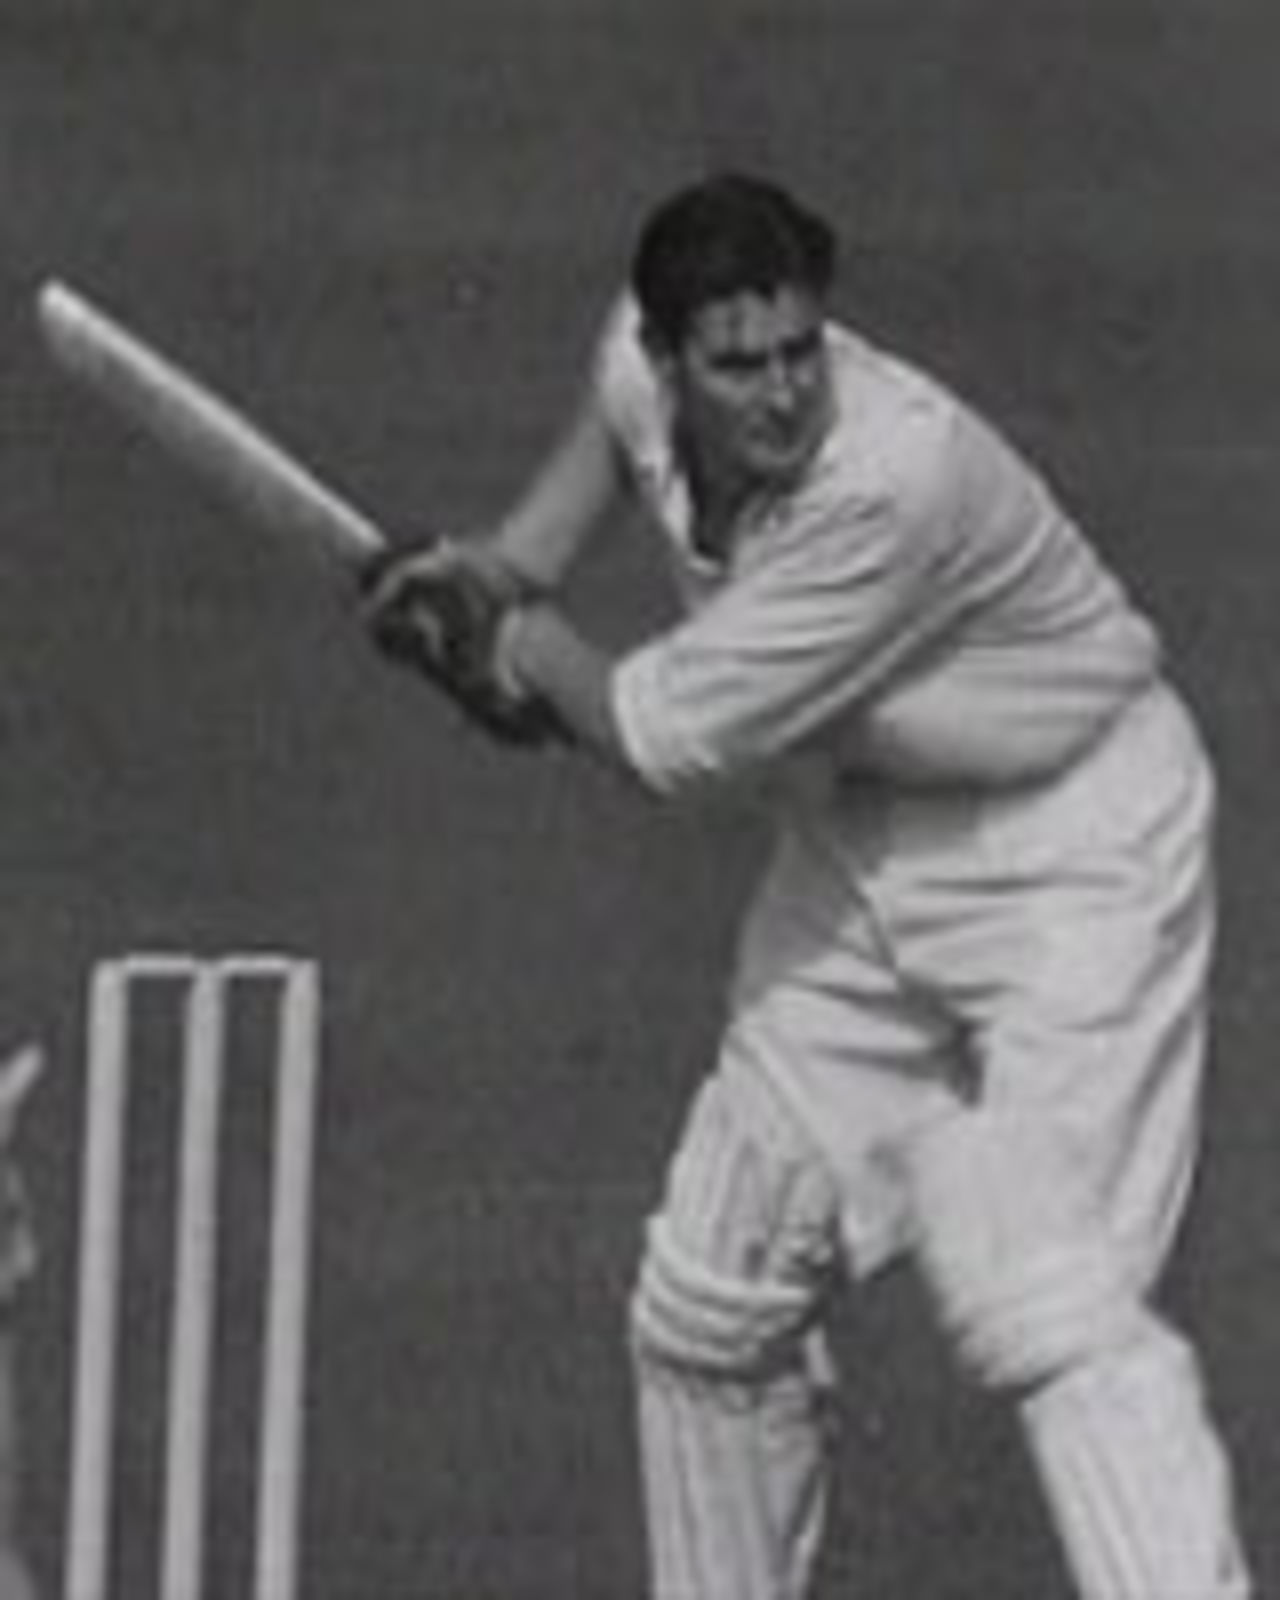 Keith Miller batting, Lord's, 1953